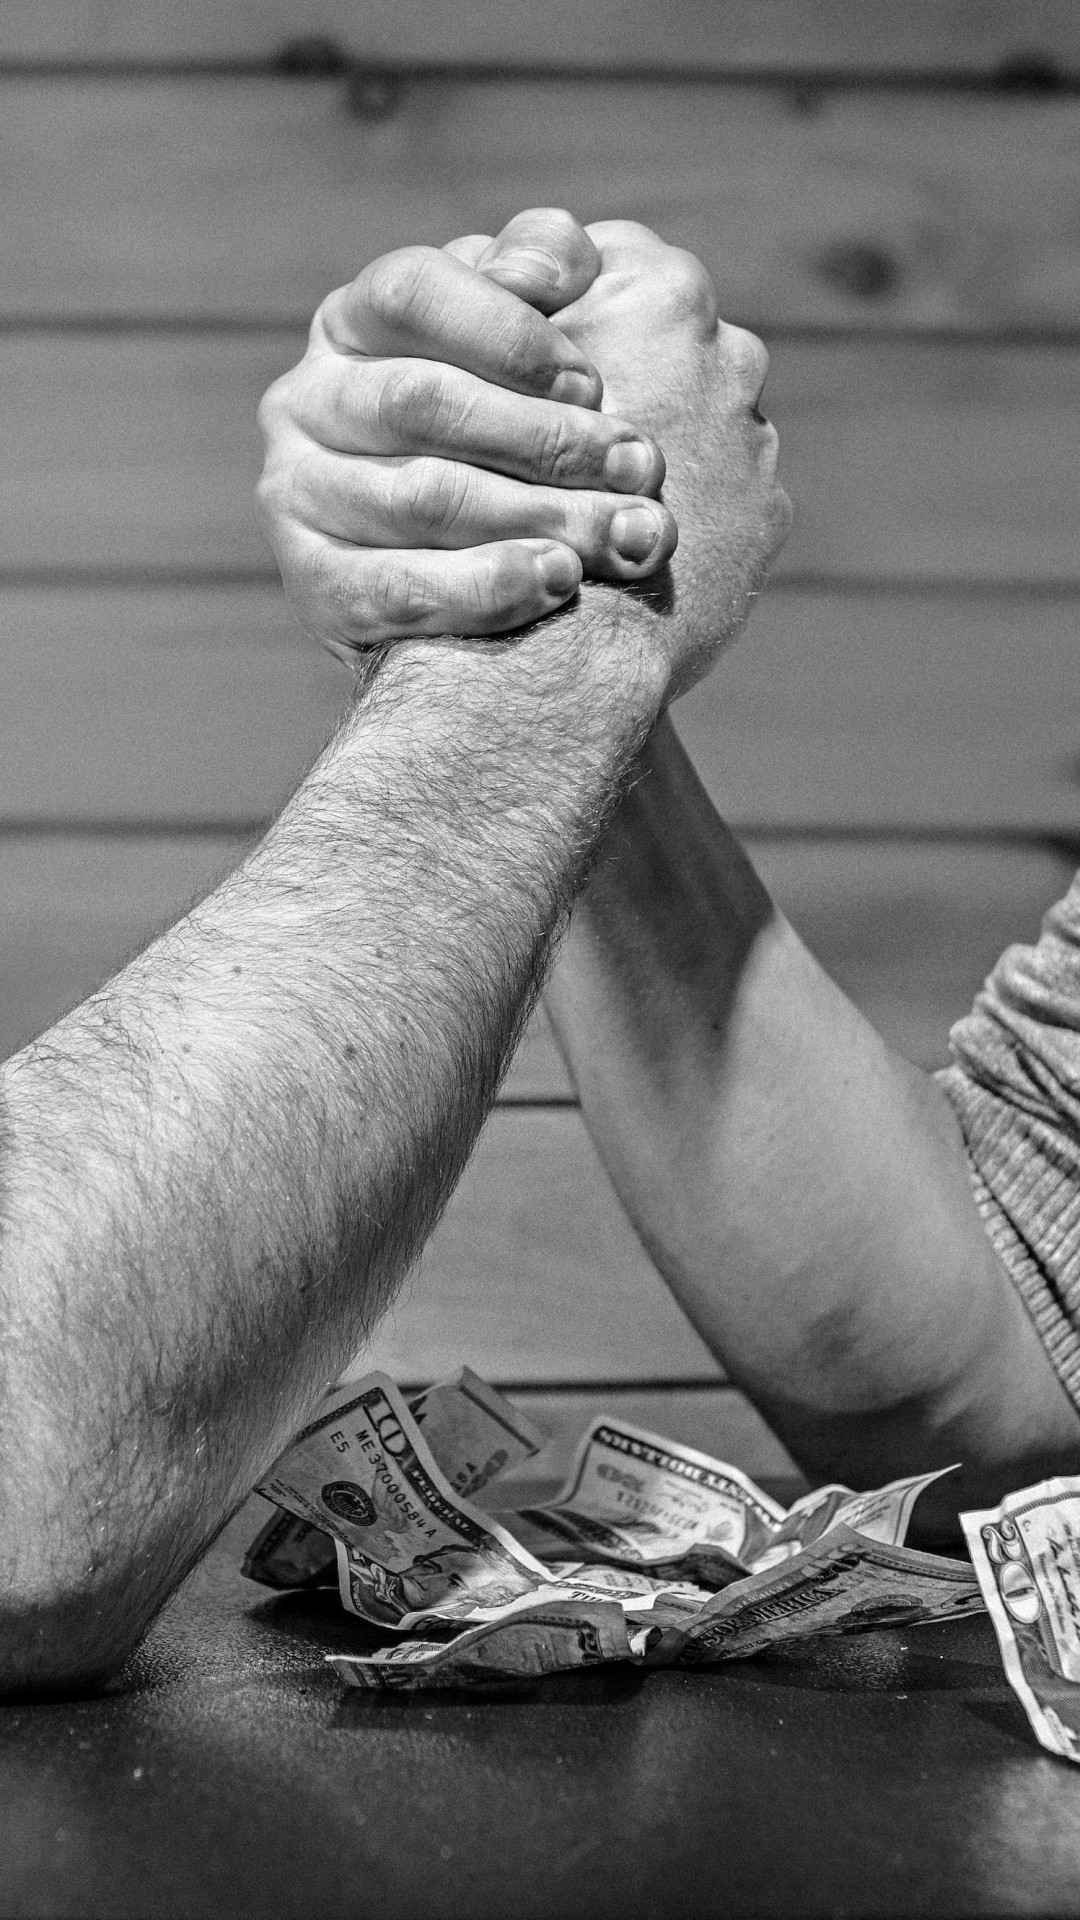 Arm Wrestling Wallpaper for SAMSUNG Galaxy Note 3